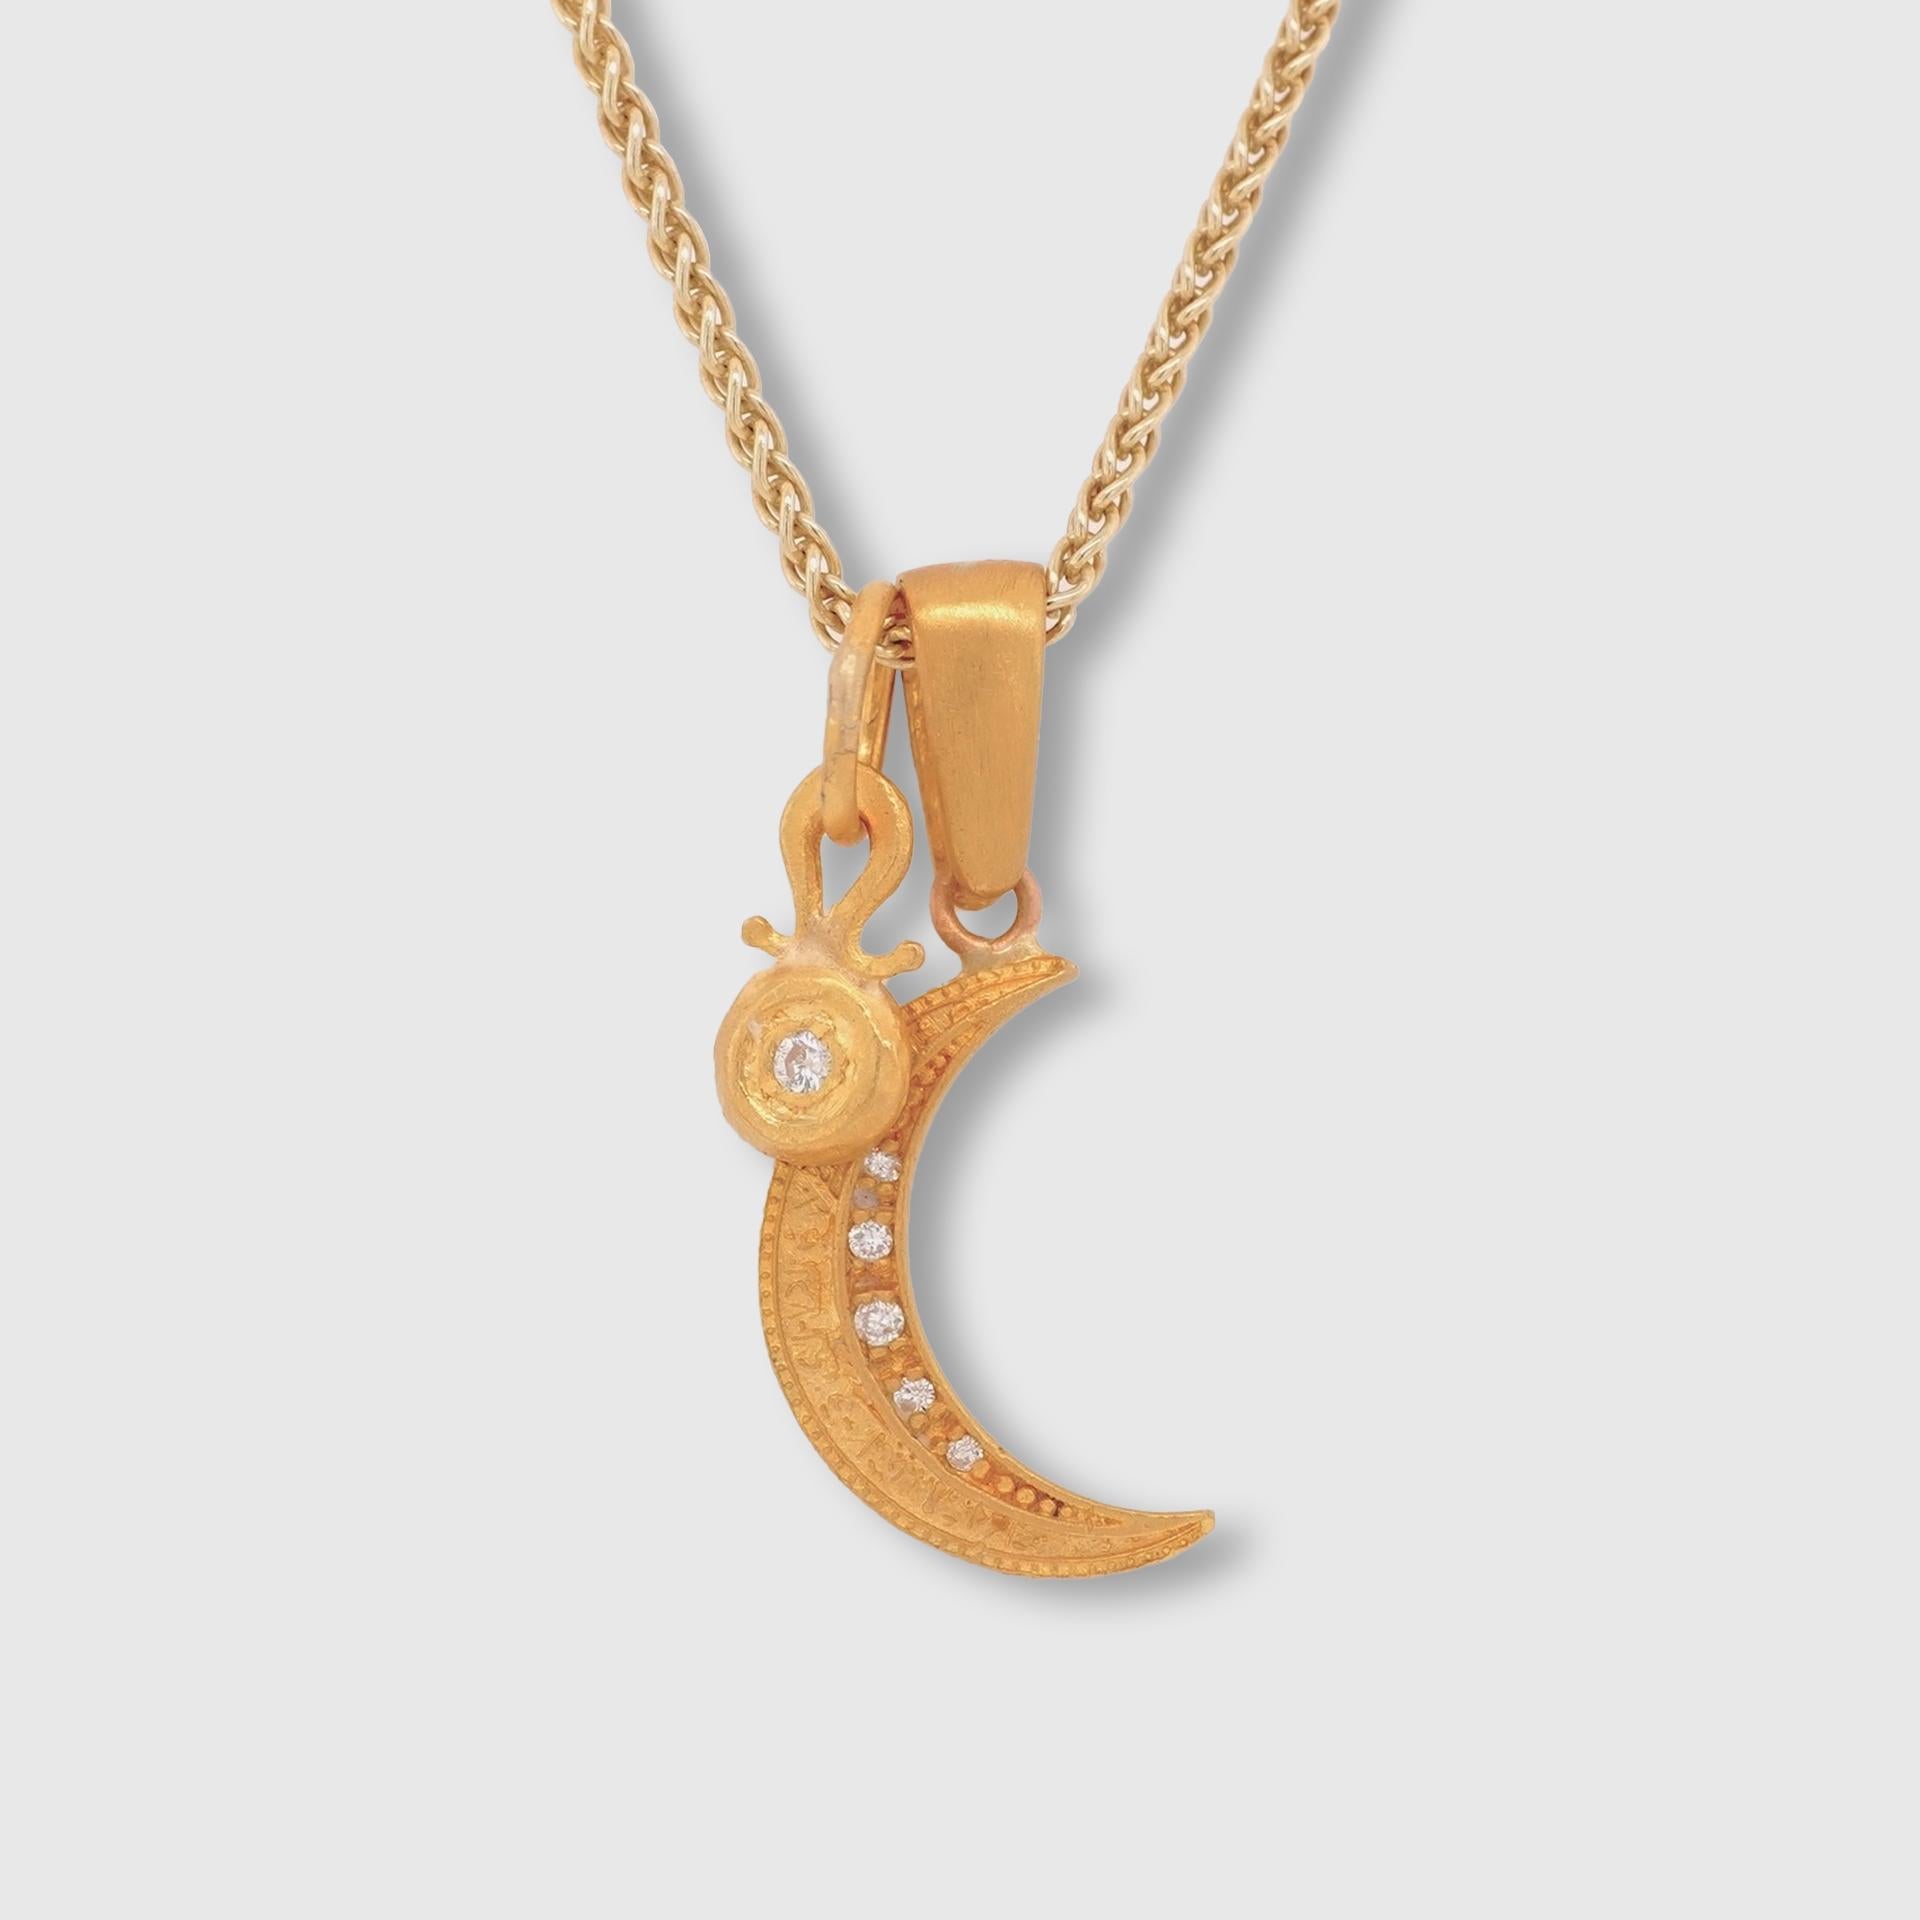 Round Cut Waxing or Waning Moon Charm Pendant, 24K Solid Yellow Gold with 0.04ct Diamonds For Sale